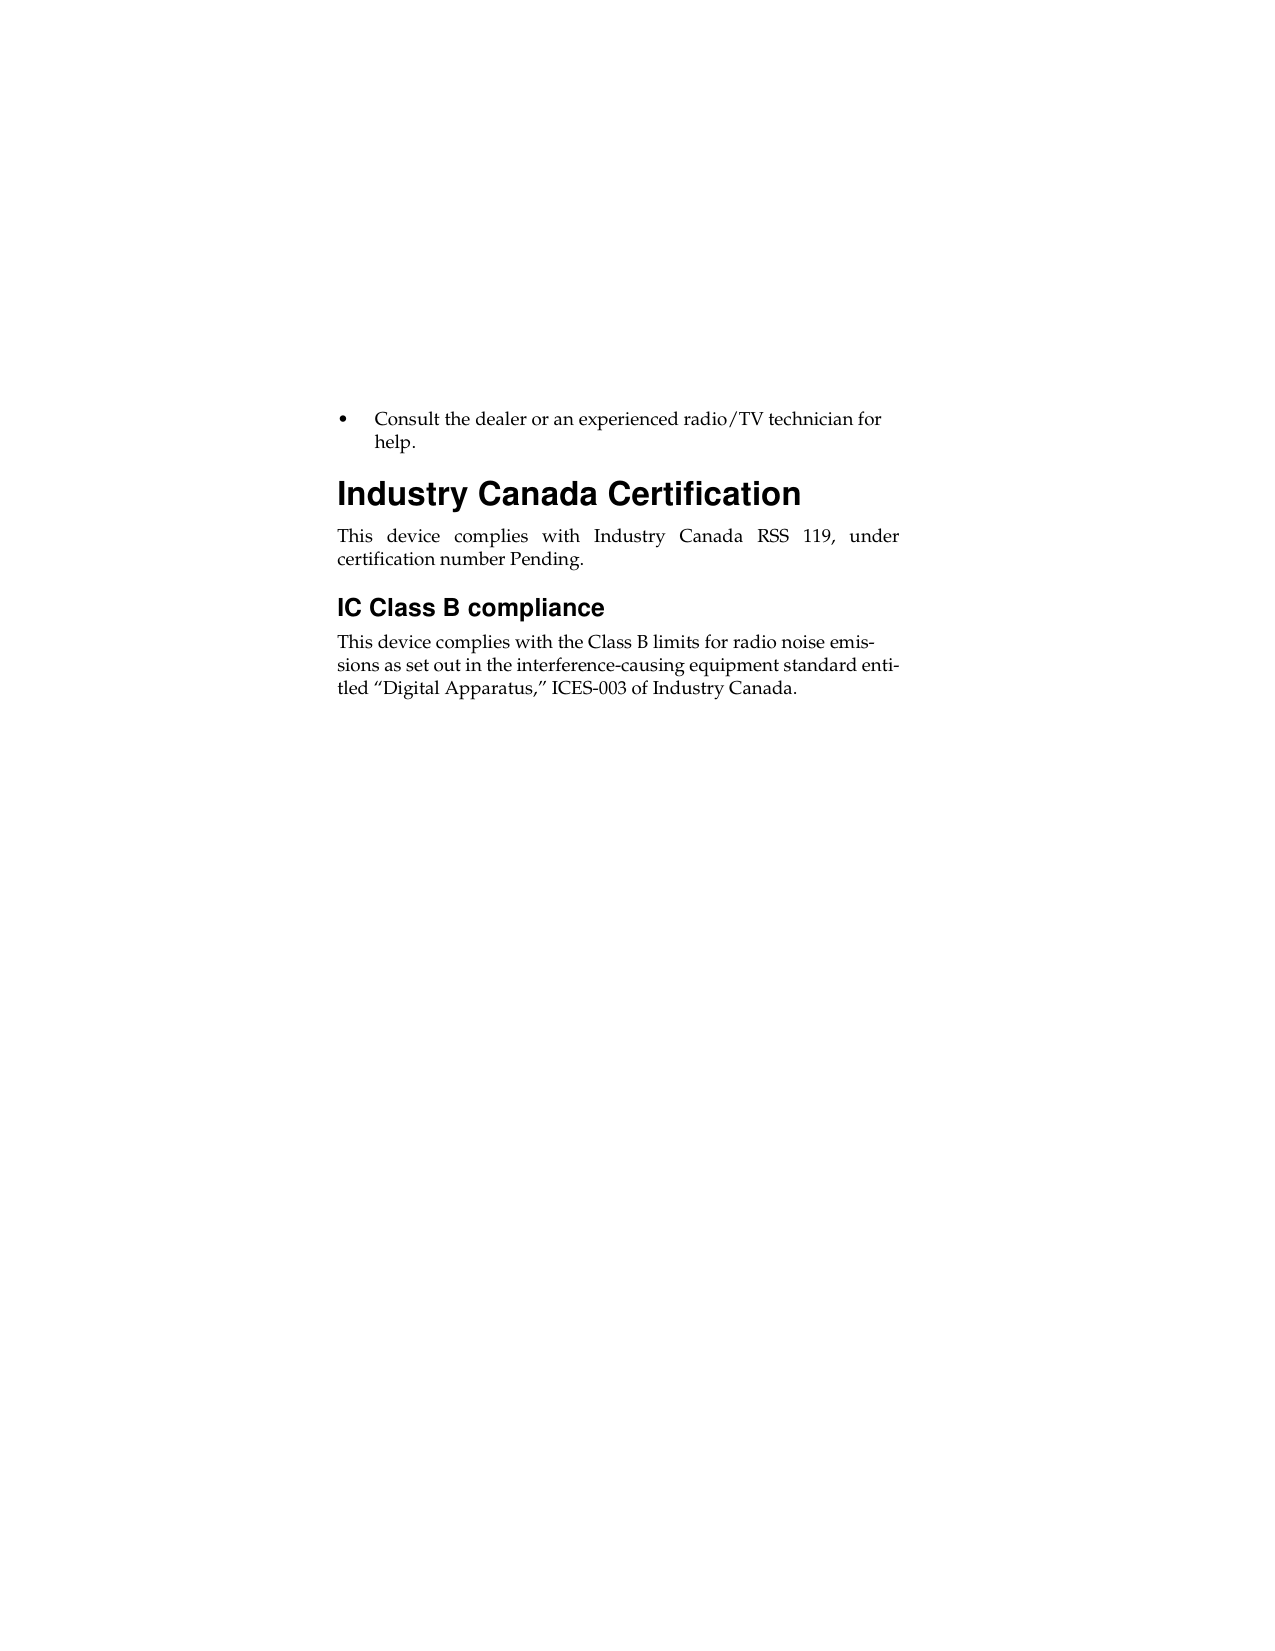 • Consult the dealer or an experienced radio/TV technician for help.Industry Canada CertificationThis device complies with Industry Canada RSS 119, undercertification number Pending.IC Class B complianceThis device complies with the Class B limits for radio noise emis-sions as set out in the interference-causing equipment standard enti-tled “Digital Apparatus,” ICES-003 of Industry Canada.